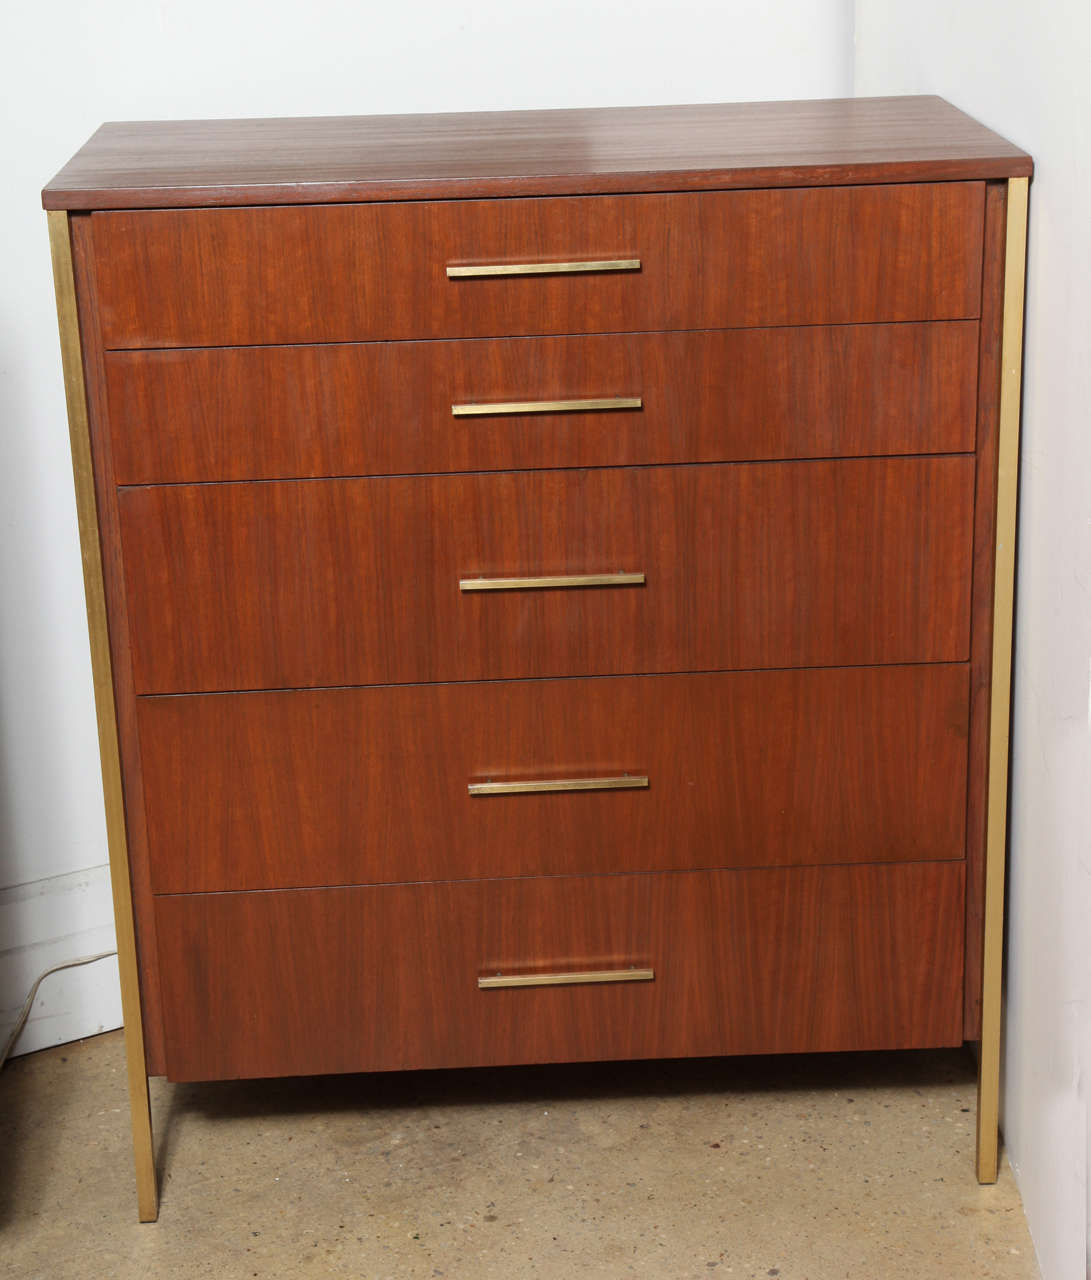 Mid Century Teak and Brass 5 Drawer Highboy Dresser in the style of Paul McCobb's Irwin collection. Complete with Brass legs, sides and pulls. Stamped Ramseur Furn. Co.  Refinished